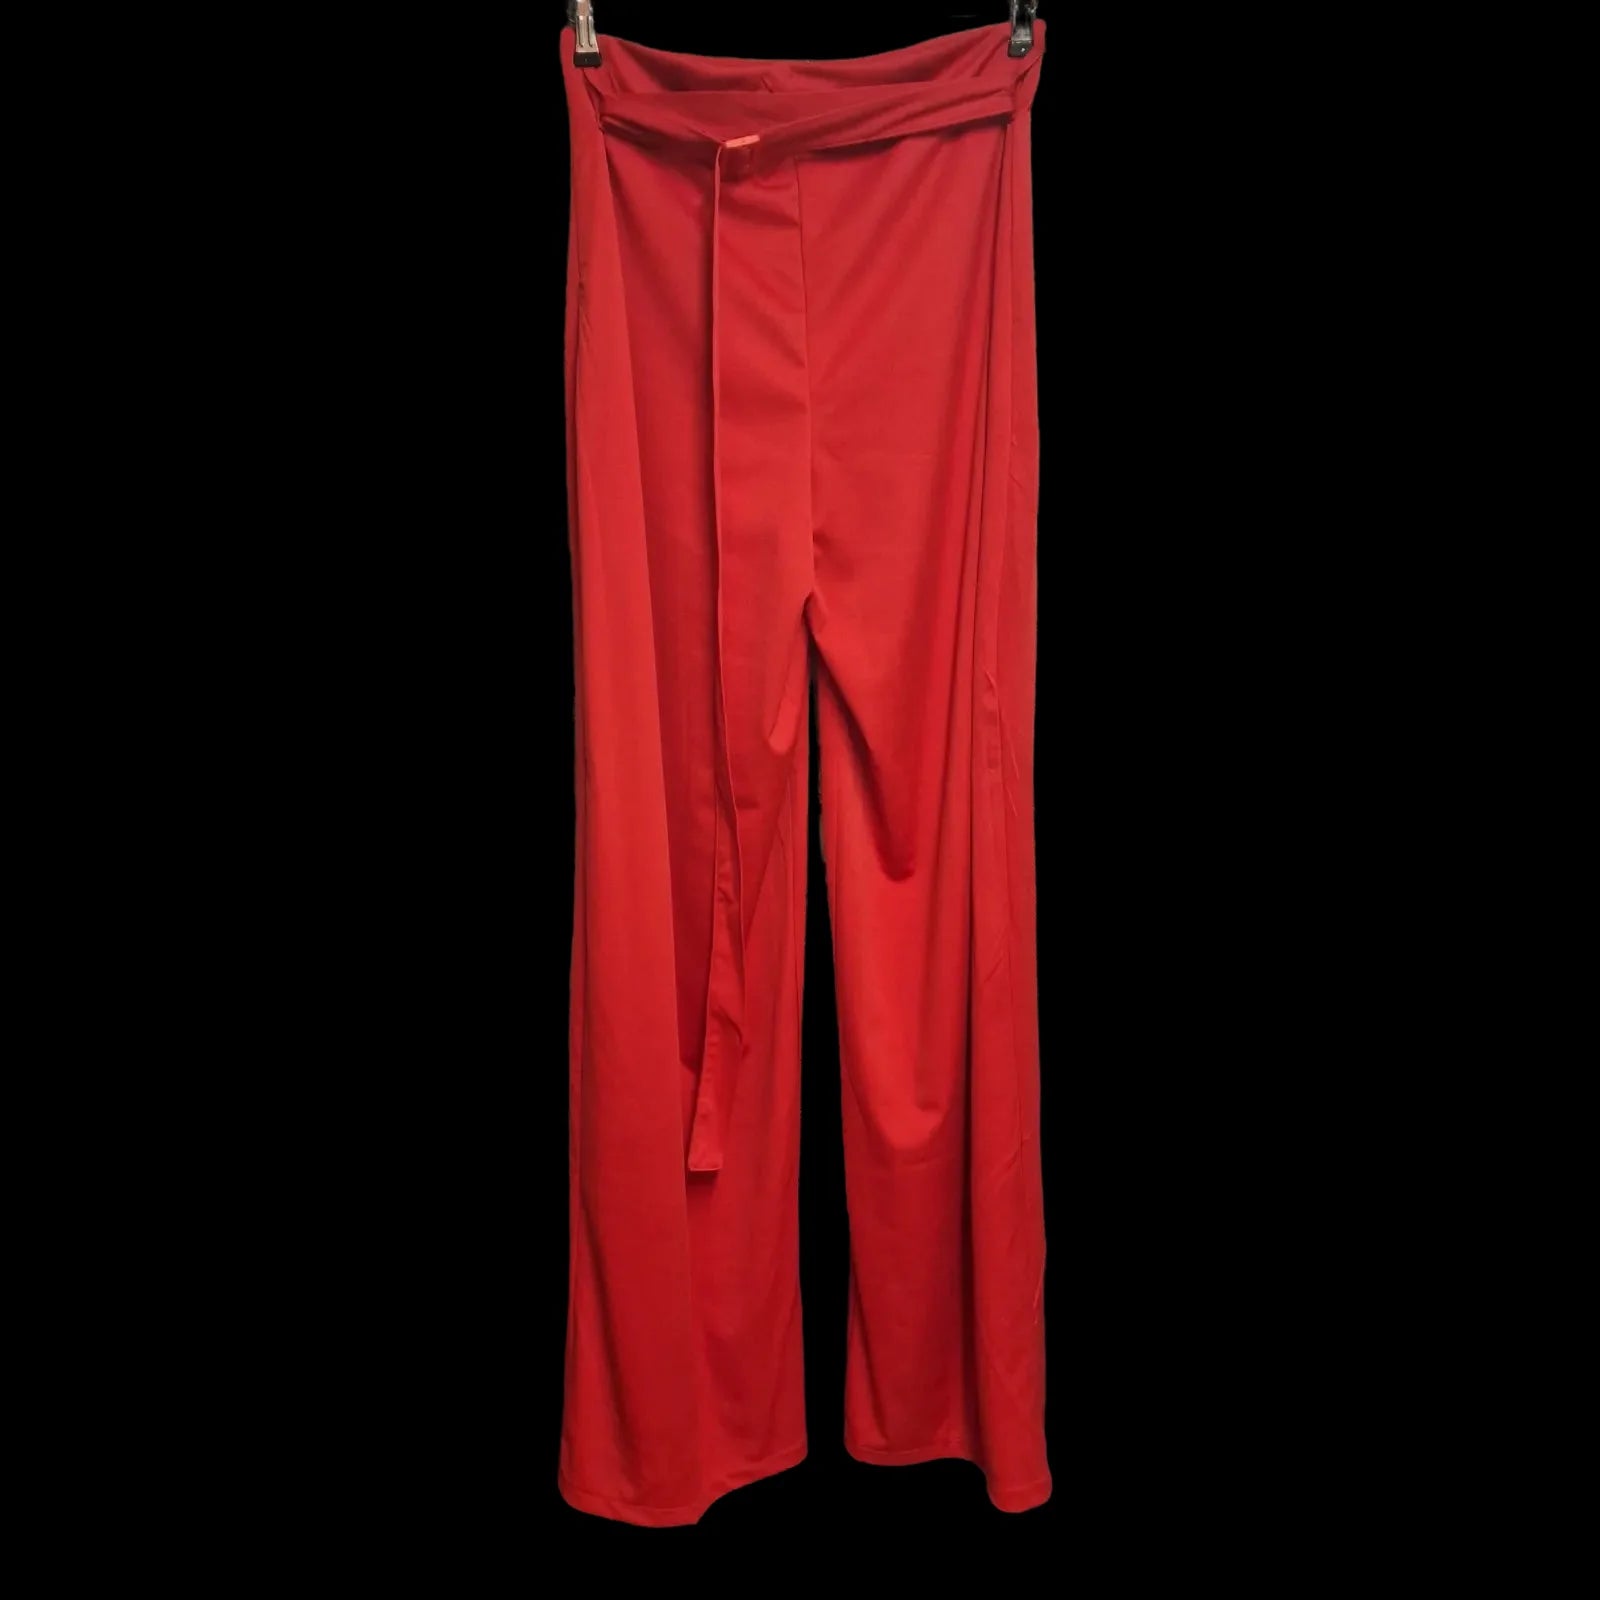 New Womens Boohoo Red Trouser & Bustier Set Uk10 - Trousers